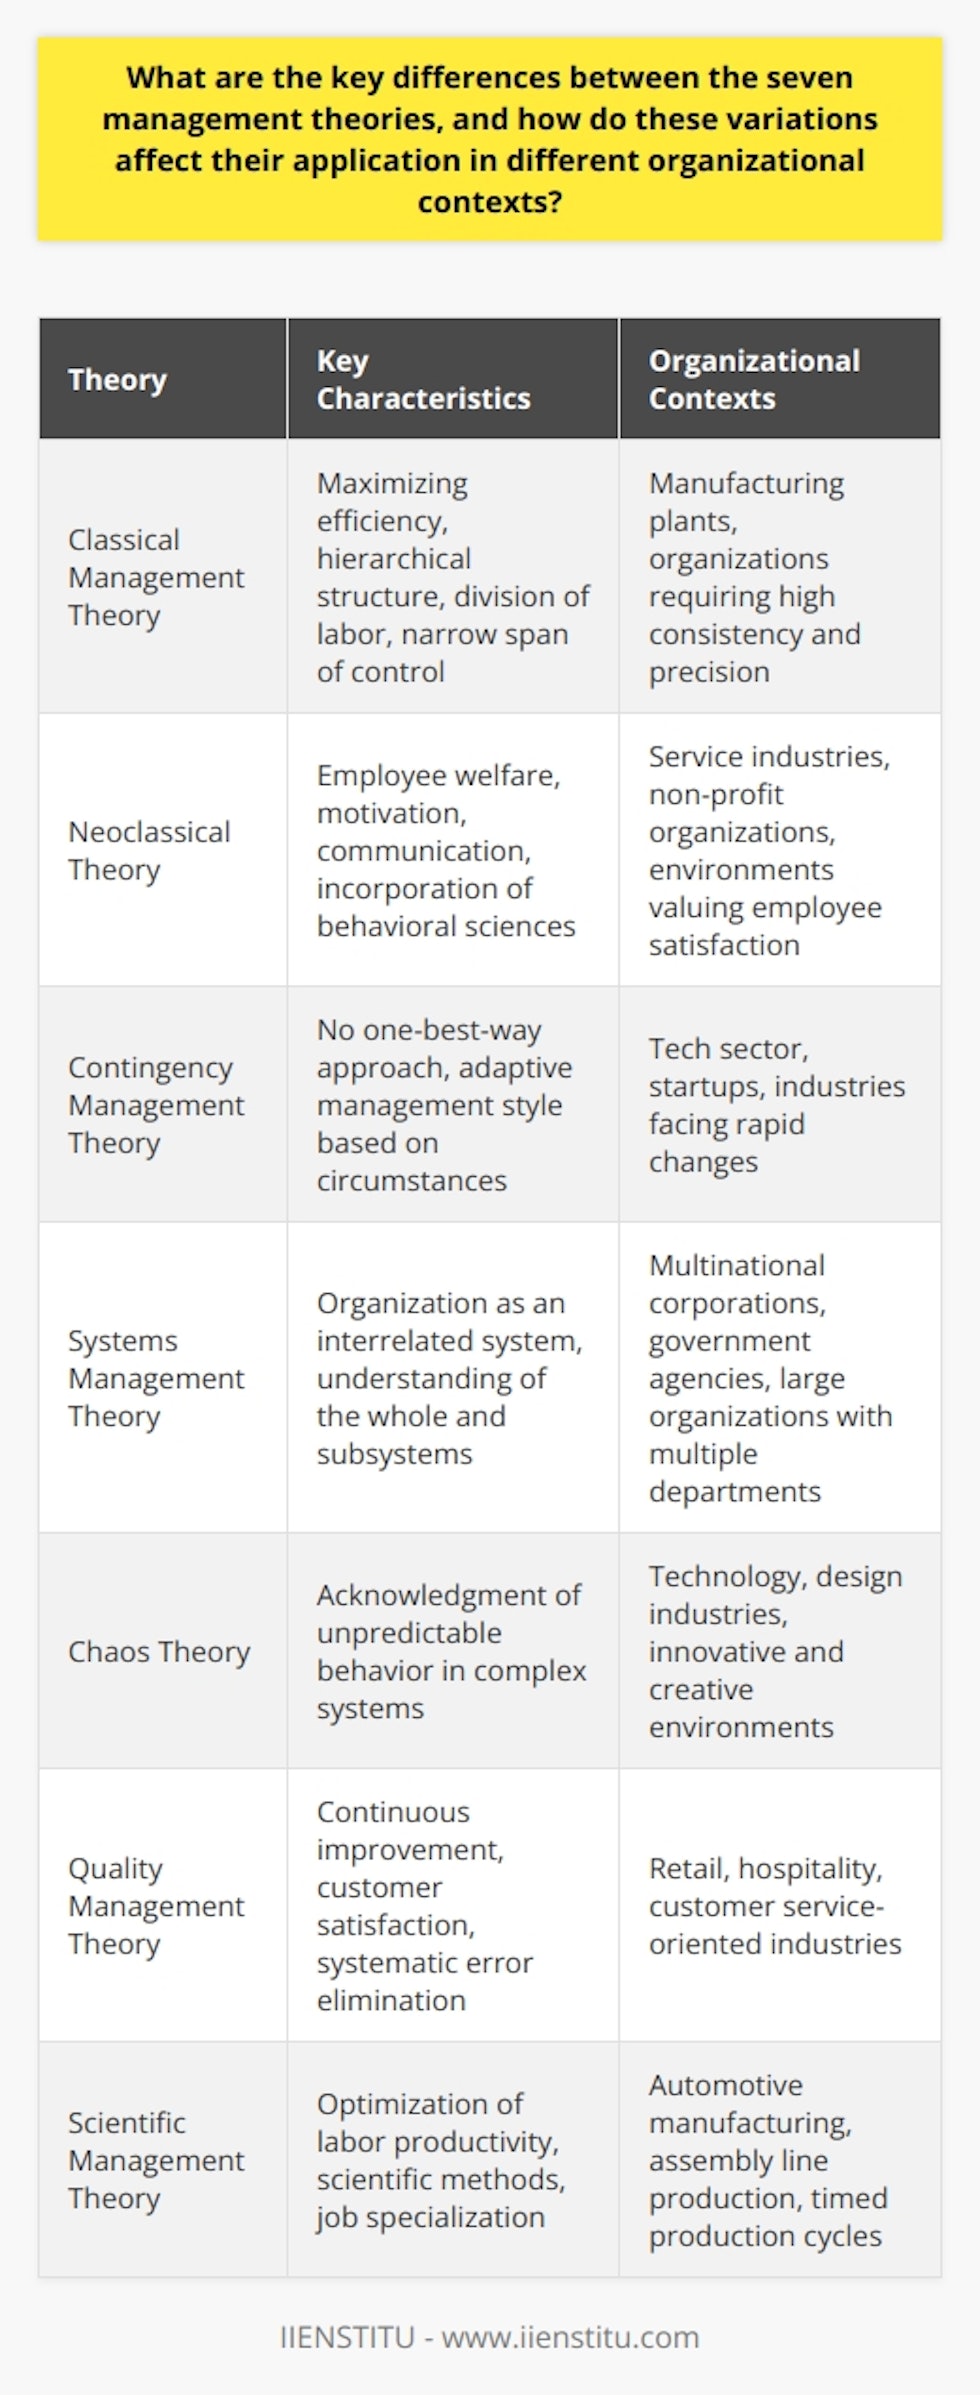 Management theories are foundational concepts that prescribe how managers can organize and control businesses to achieve efficiency, effectiveness, and other goals. Each theory provides a different viewpoint on how to manage an organization, and the selection of one over another can significantly influence the way a business operates. Here, we explore the key characteristics of seven management theories and how these variations affect their application in various organizational contexts.**Classical Management Theory**Classical Management Theory is rooted in maximizing efficiency and productivity through the improvement of managerial organization. It typically emphasizes a structured hierarchy, clear division of labor, and a narrow span of control to ensure precision and workflow. Organizations needing high levels of consistency and precision, such as manufacturing plants, benefit from this theory. However, the theory’s mechanistic nature may not account for human motivation sufficiently, making it less applicable in more dynamic, people-oriented environments.**Neoclassical Theory**Shifting focus from strict structure of Classical Theory, Neoclassical Theory incorporates behavioral sciences into management. It emphasizes employee welfare, motivation, and communication, recognizing that human aspects deeply impact productivity. This approach is beneficial in environments like service industries or non-profit organizations, where employee satisfaction and interpersonal relationships are critical for successful operations.**Contingency Management Theory**Uniquely adaptive, the Contingency Management Theory asserts that there is no one-best-way to manage. Instead, organizations must tailor their management style to fit the particular circumstances—be it the environment, the task at hand, or individuals involved. This versatility makes it practical for industries that are subject to rapid changes and need to frequently adapt, such as the tech sector or startups.**Systems Management Theory**Systems Management Theory views an organization as a system composed of interrelated and interdependent entities. In this approach, understanding the whole system, as well as the subsystems and how they interact, is crucial for success. Consequently, this complex view is fitting for large organizations with multiple departments and stakeholders, such as multinational corporations or government agencies.**Chaos Theory**Emerging from the field of mathematics and physics, Chaos Theory in management acknowledges that organizations are complex systems that can exhibit unpredictable behavior. This theory helps innovative and creative industries, such as those in technology or design, thrive in environments where adaptability and understanding dynamic systems are more valuable than strict control.**Quality Management Theory**Emphasizing continuous quality improvement and customer satisfaction, Quality Management Theory employs a systematic approach to eliminating errors and improving processes. Industries revolving around customer service, including retail and hospitality, utilize this theory to enhance customer experiences and involve all employees in a culture of constant improvement.**Scientific Management Theory**Lastly, Scientific Management Theory, developed by Frederick W. Taylor, is centered around the analysis and synthesis of workflows. Its main objective is optimizing labor productivity through scientific methods and job specialization. Industries such as automotive manufacturing, which rely on assembly lines and timed production cycles, find this theory particularly relevant.Each of these management theories has a distinct set of principles, practices, and outcomes that relate to specific organizational contexts. For instance, some theories might align well with an organization valuing tradition and hierarchy, while others may better serve agile companies embracing change and complexity. Understanding the unique components and suitability of each theory can guide managers and organizational leaders to select and implement the right approaches to achieve their objectives and foster an effective management strategy aligned with their organizational needs.